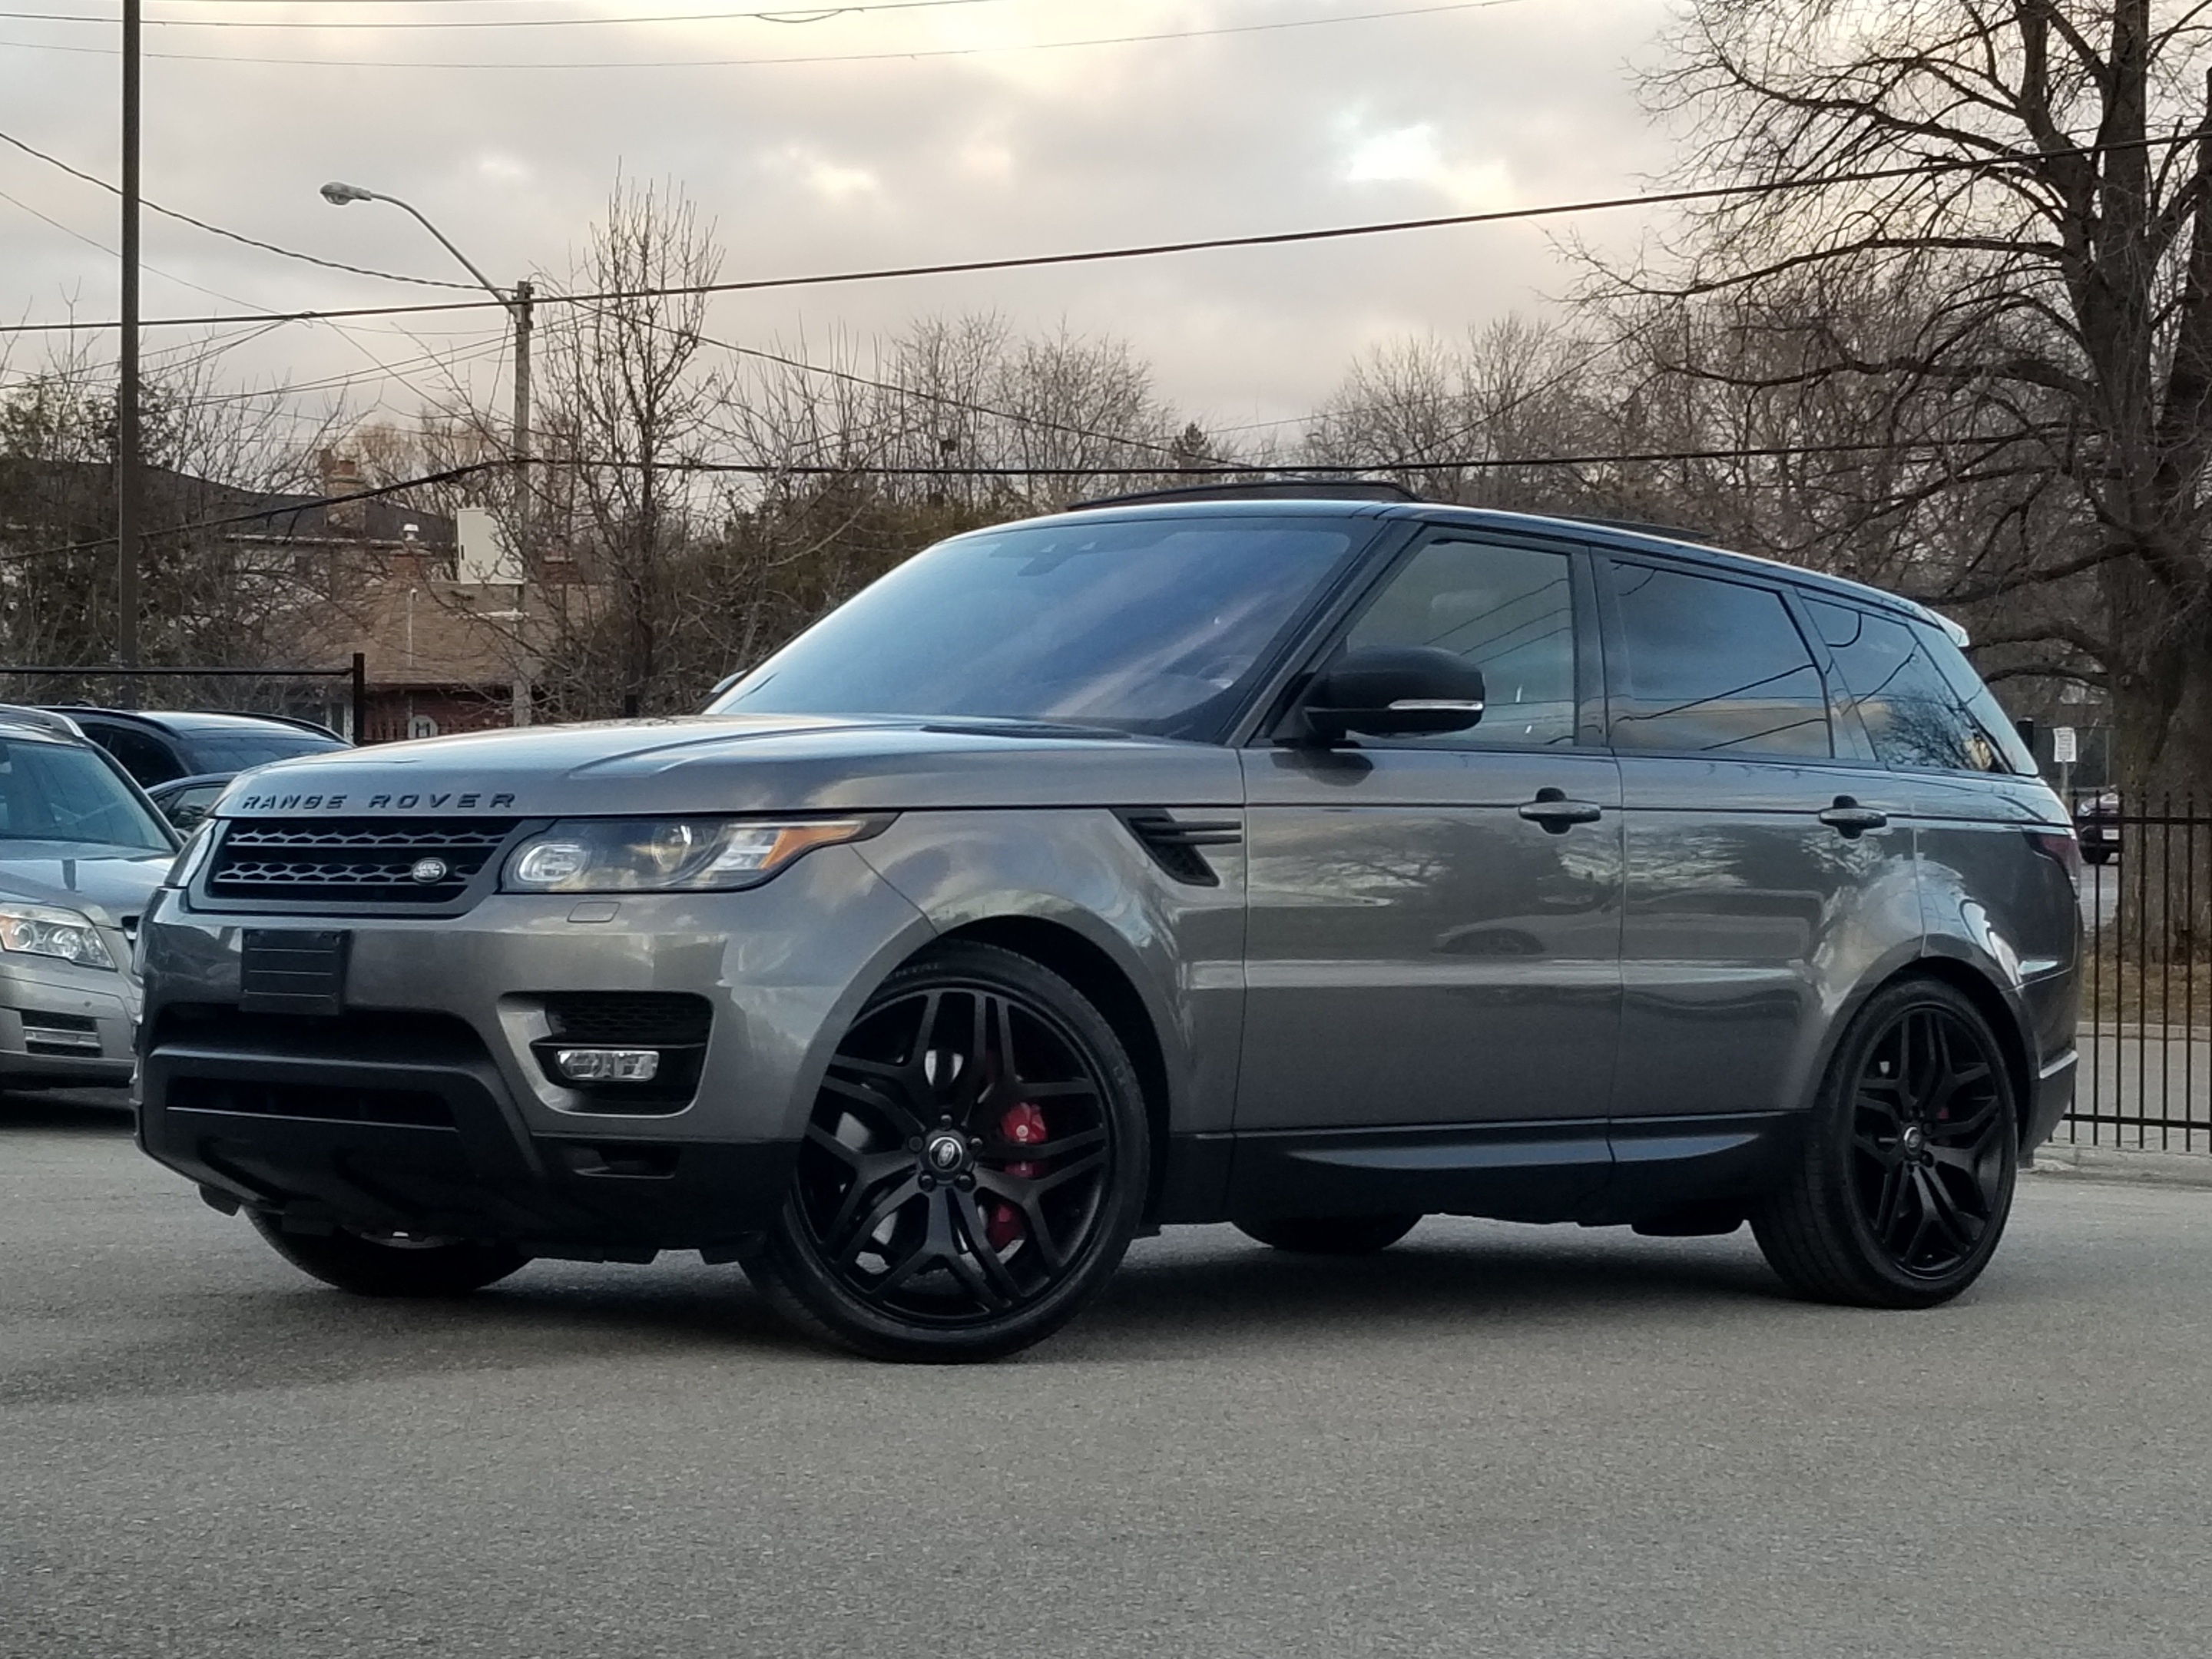 2017 Land Rover Range Rover Sport CLEAN CARFAX|5.0L V8|SUPERCHARGED|COOLED SEATS|NAV